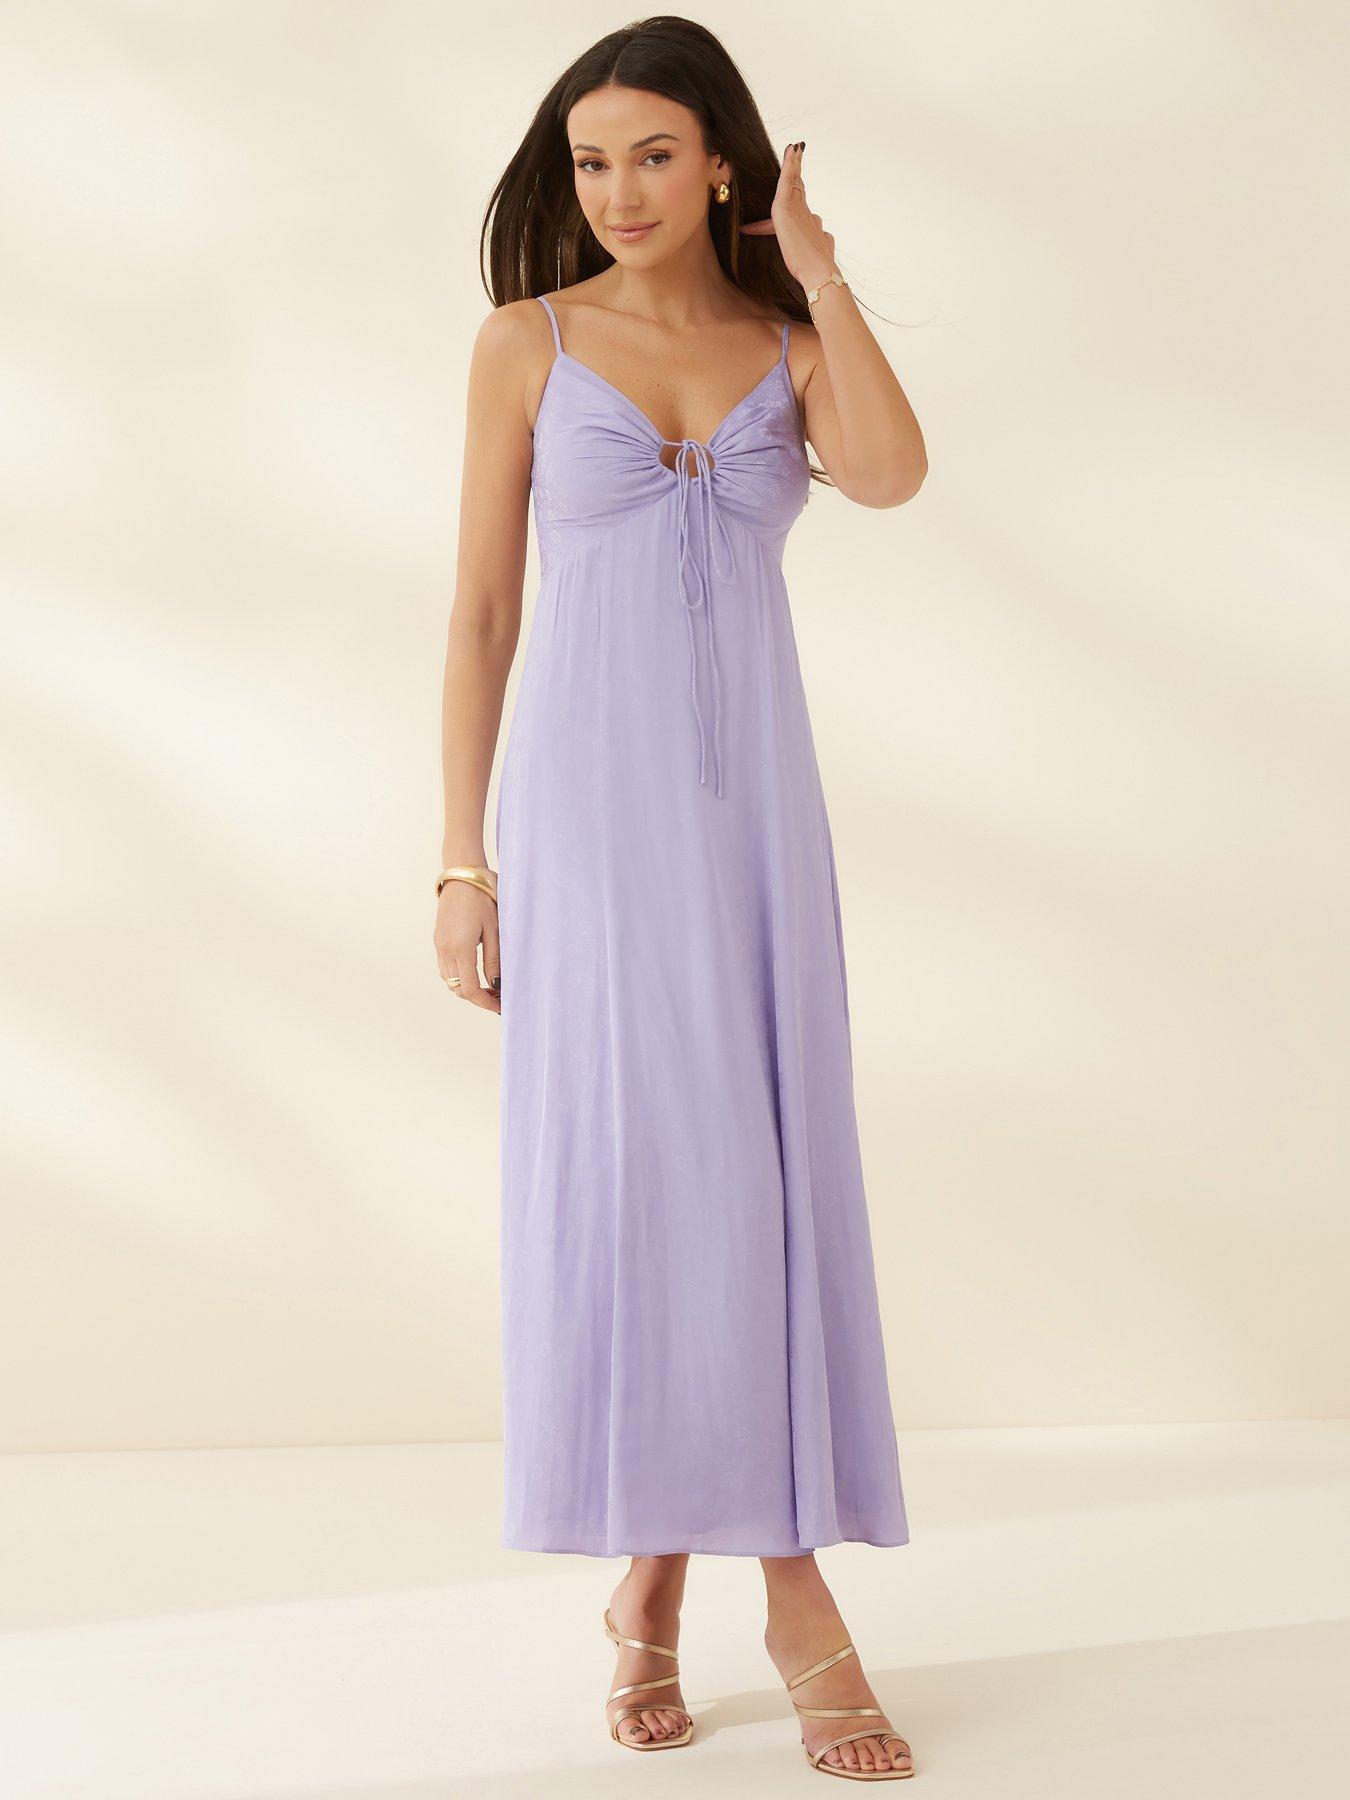 Lilac Clothing- 40 Best Ways to Wear Lilac Outfits For Women